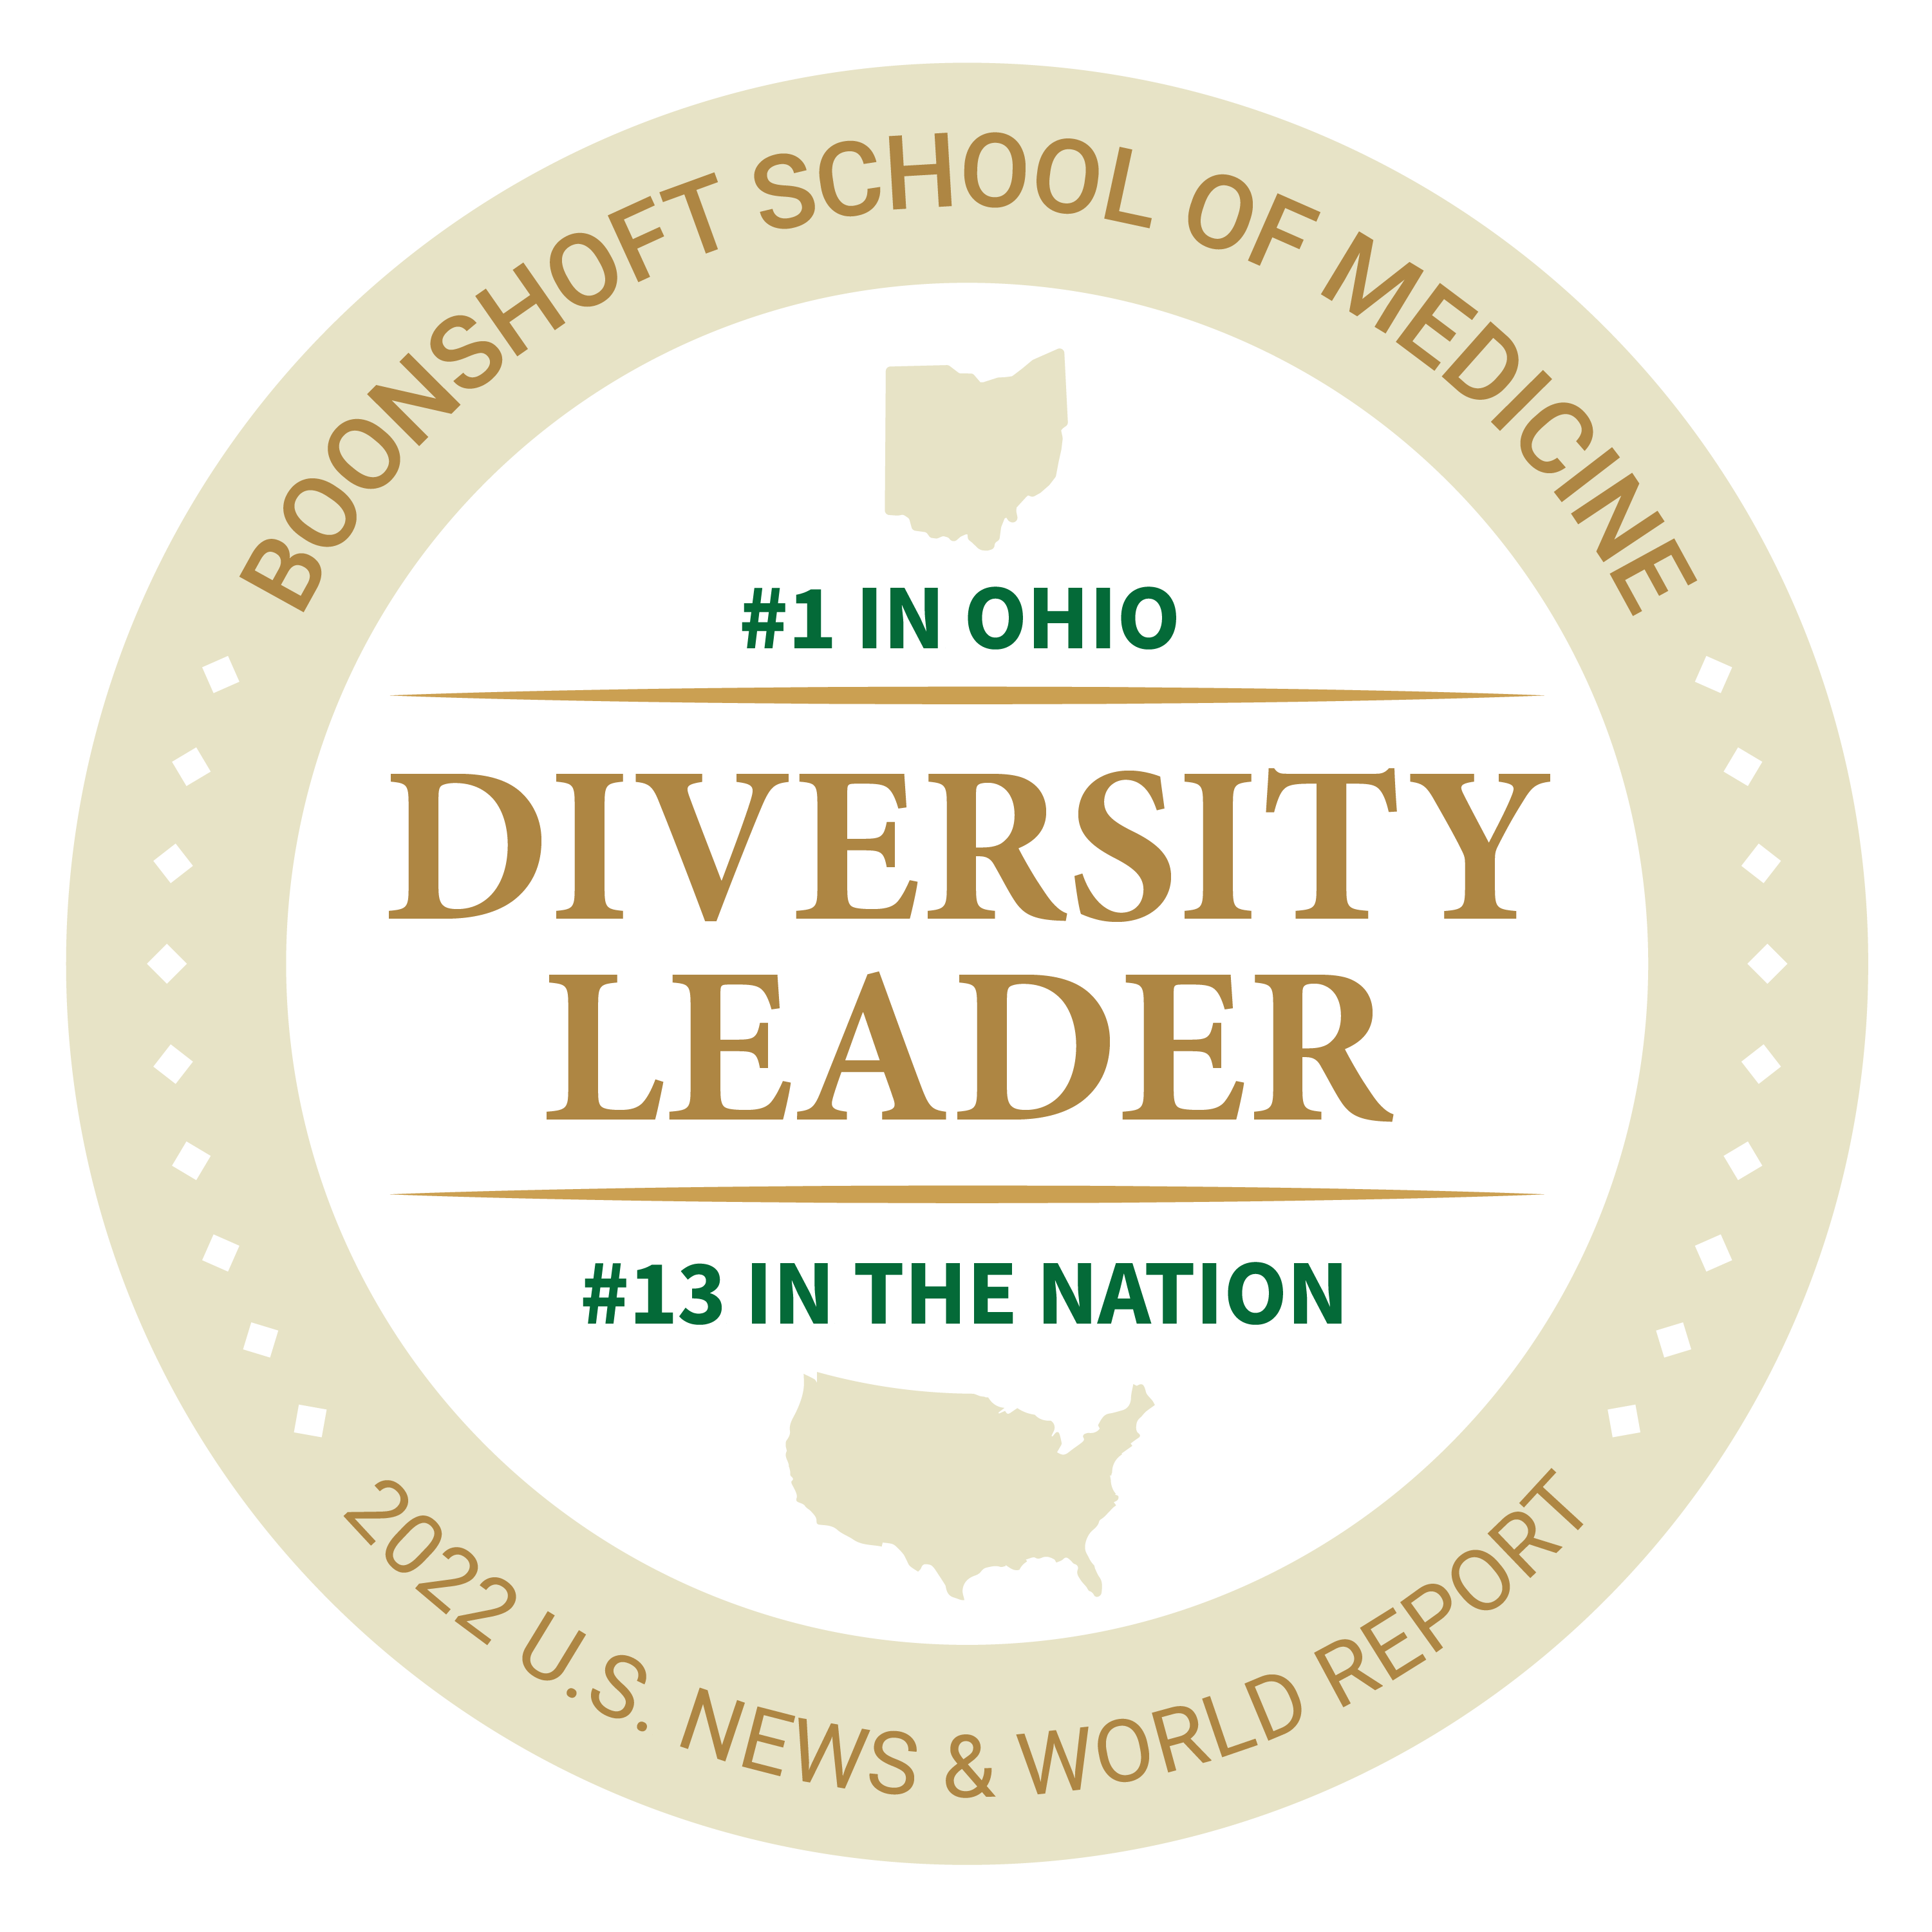 2022 U.S. News & World Report 1st in Ohio 13th in the Nation Diversity Leader Boonshoft School of Medicine.png